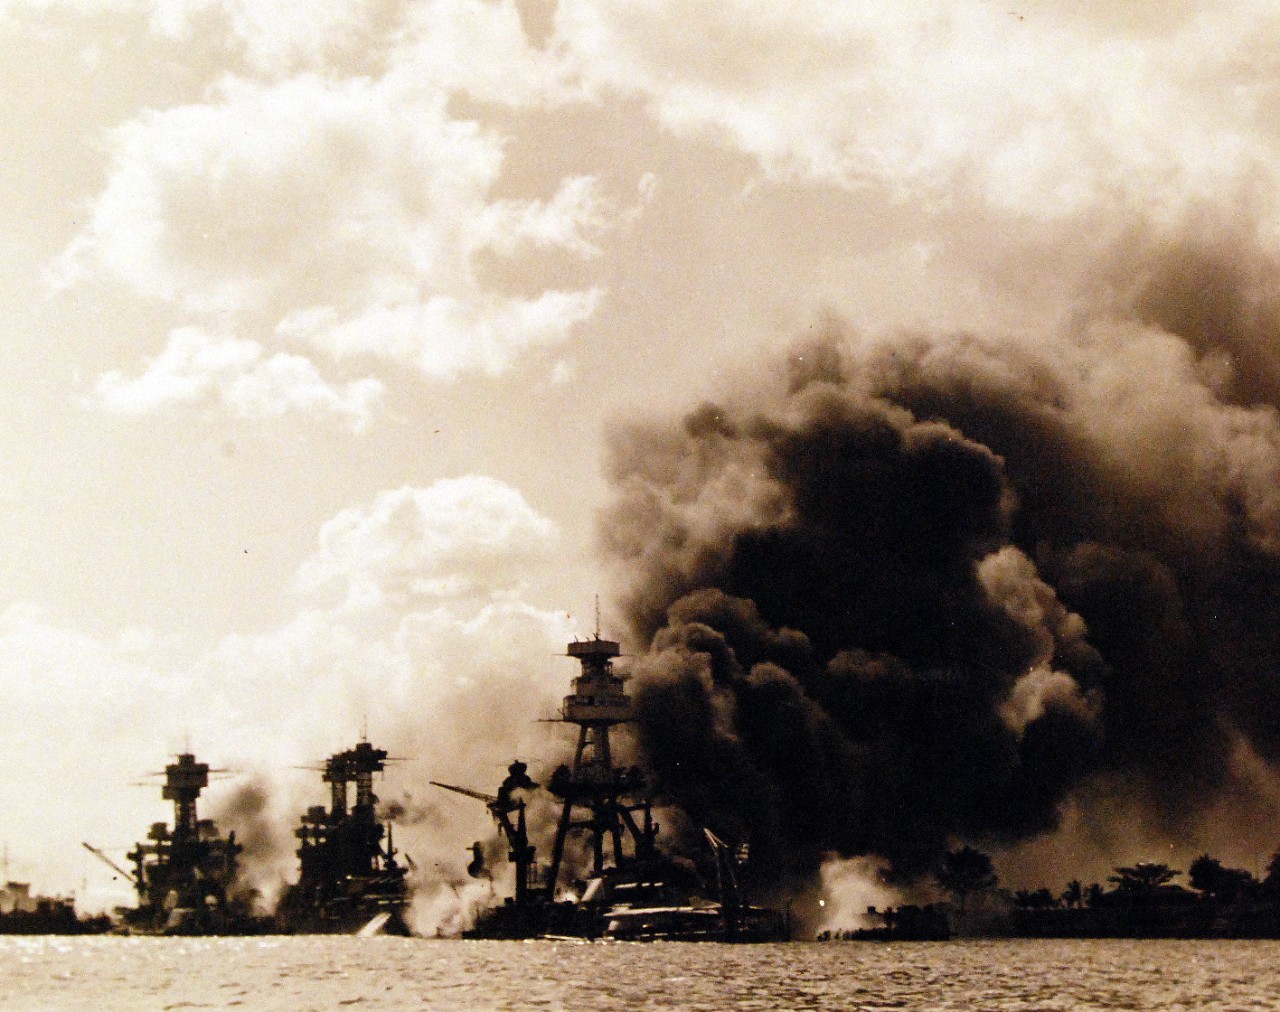 80-G-32421:  Pearl Harbor Attack, 7 December 1941.  View looking up "Battleship Row" on 7 December 1941, after the Japanese attack. USS Arizona (BB-39) is in the center, burning furiously. To the left of her are USS Tennessee (BB-43) and the sunken USS West Virginia (BB-48).  Similar to NH 97378. Official U.S. Navy photograph, now in the collections of the National Archives.     (9/15/15).